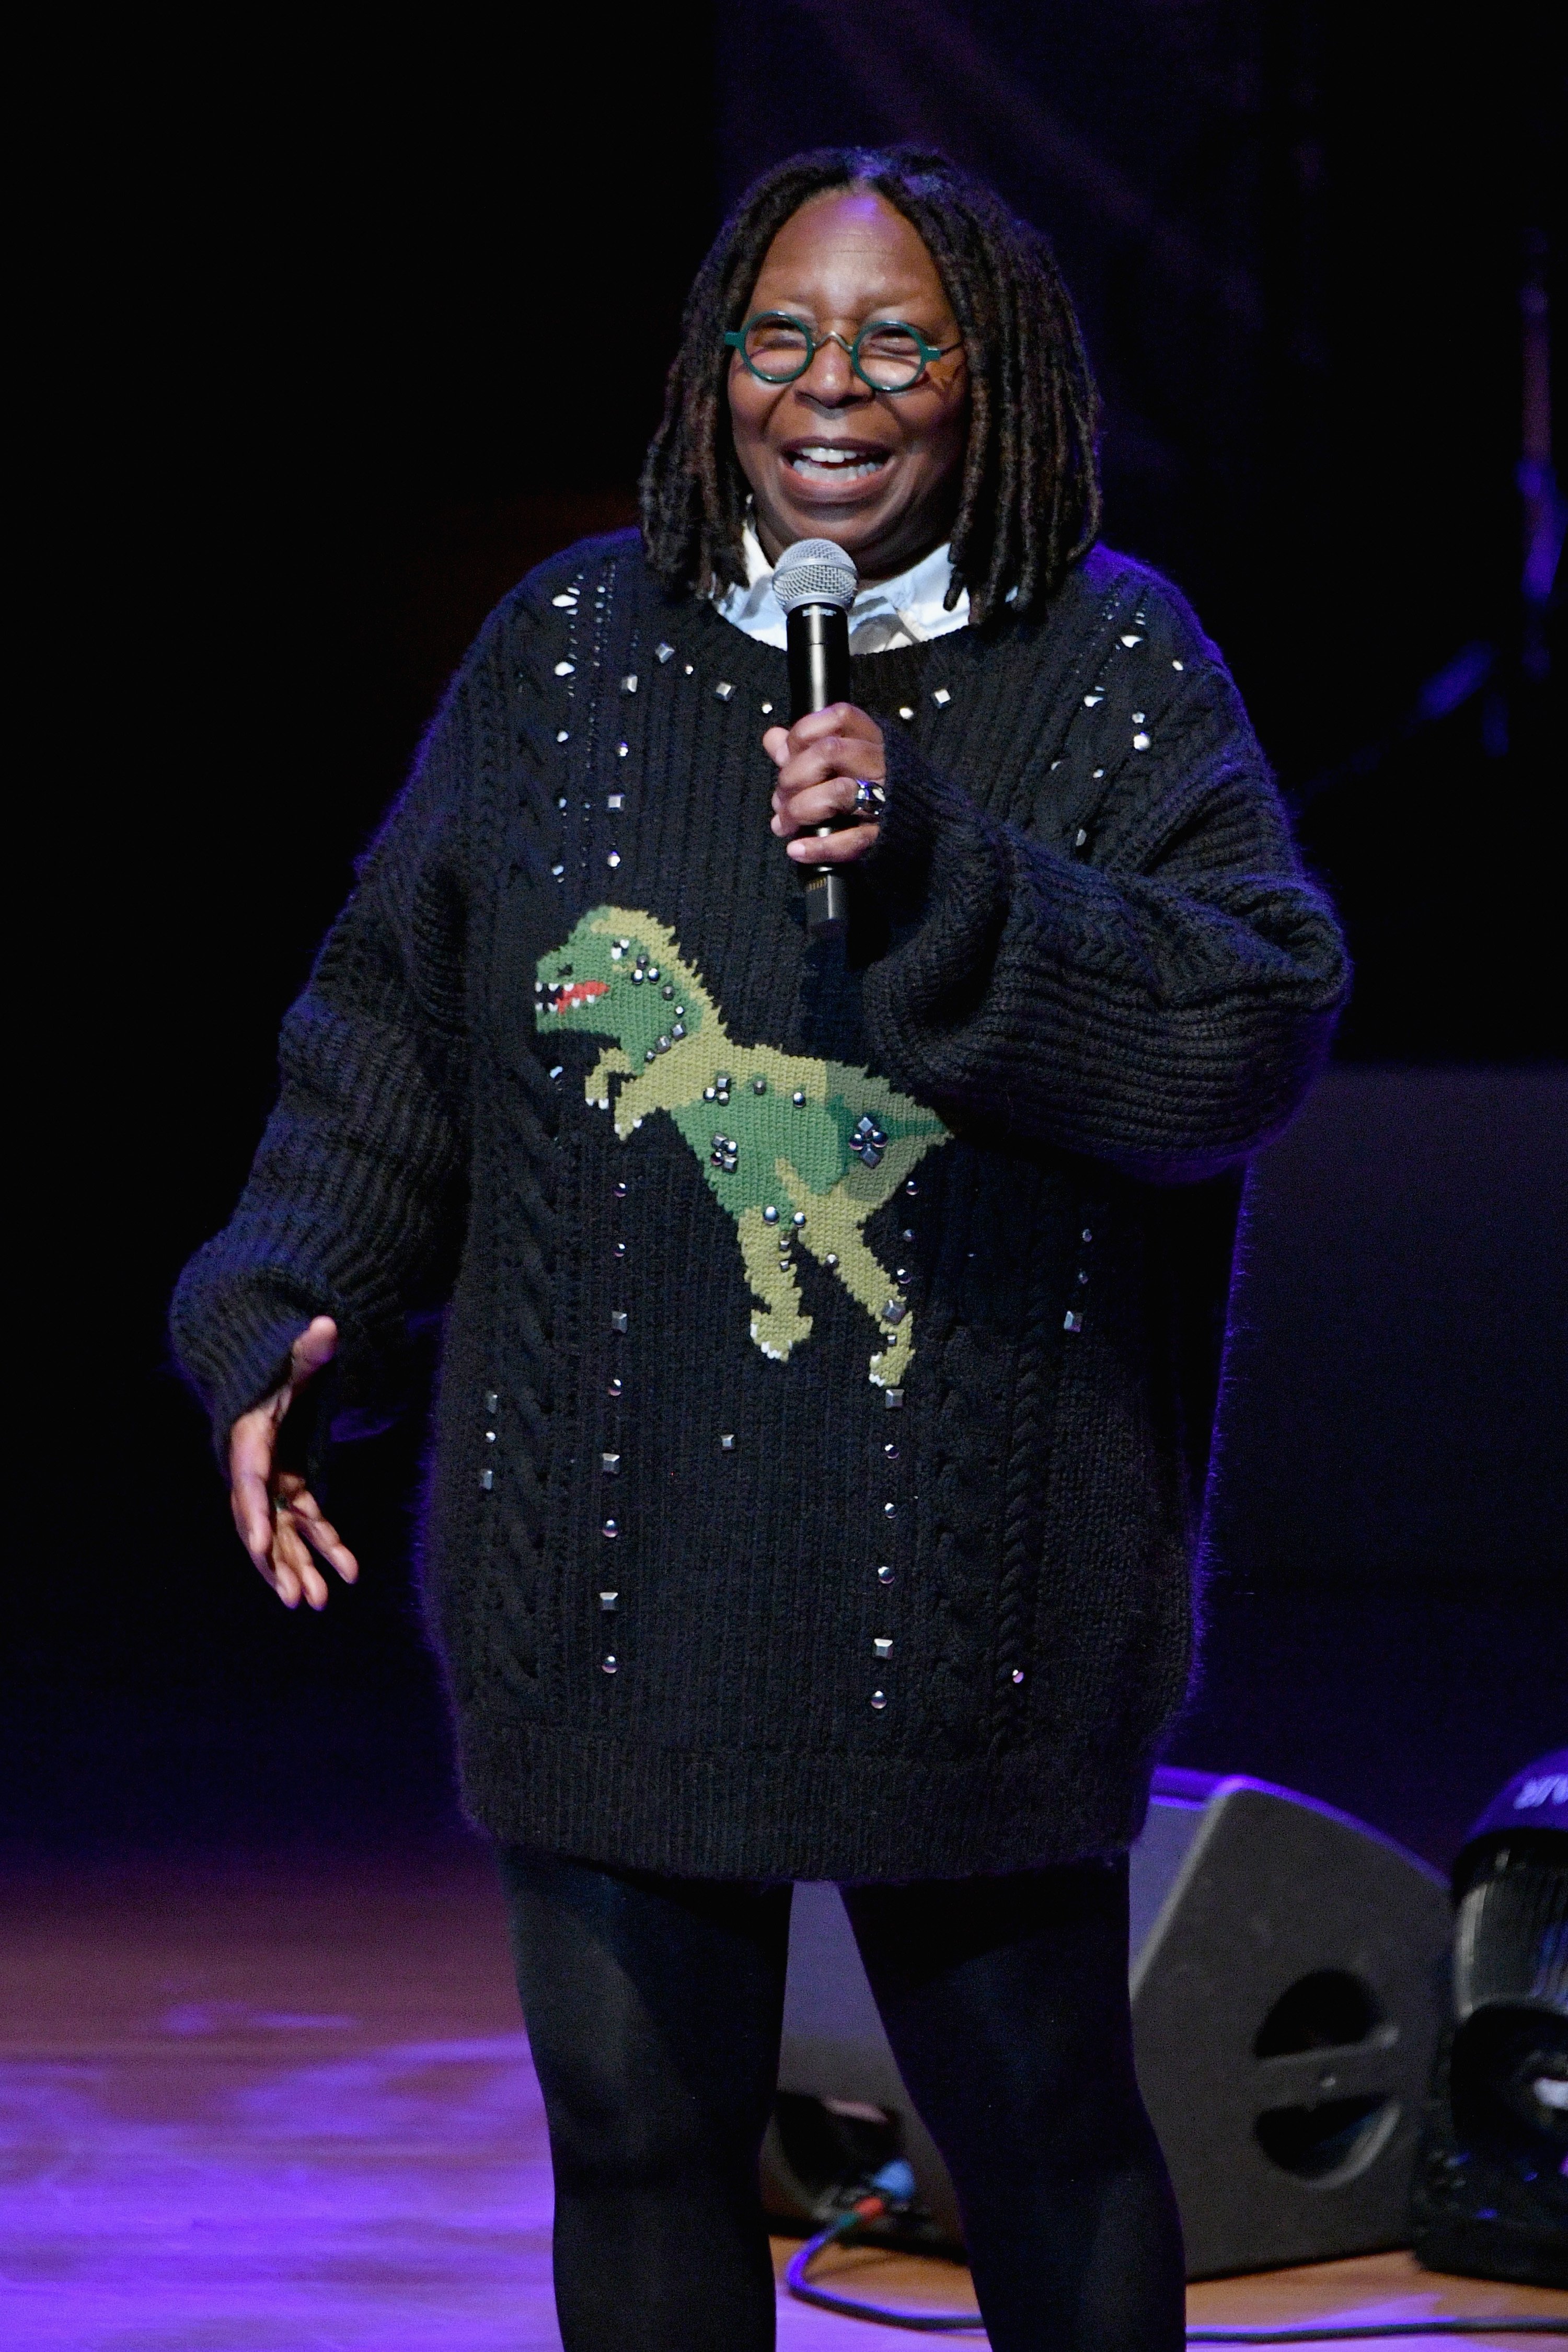 Whoopi Goldberg at the Lincoln Center Fashion Gala - An Evening Honoring Coach on Nov. 29, 2018 in New York City |Photo: Getty Images